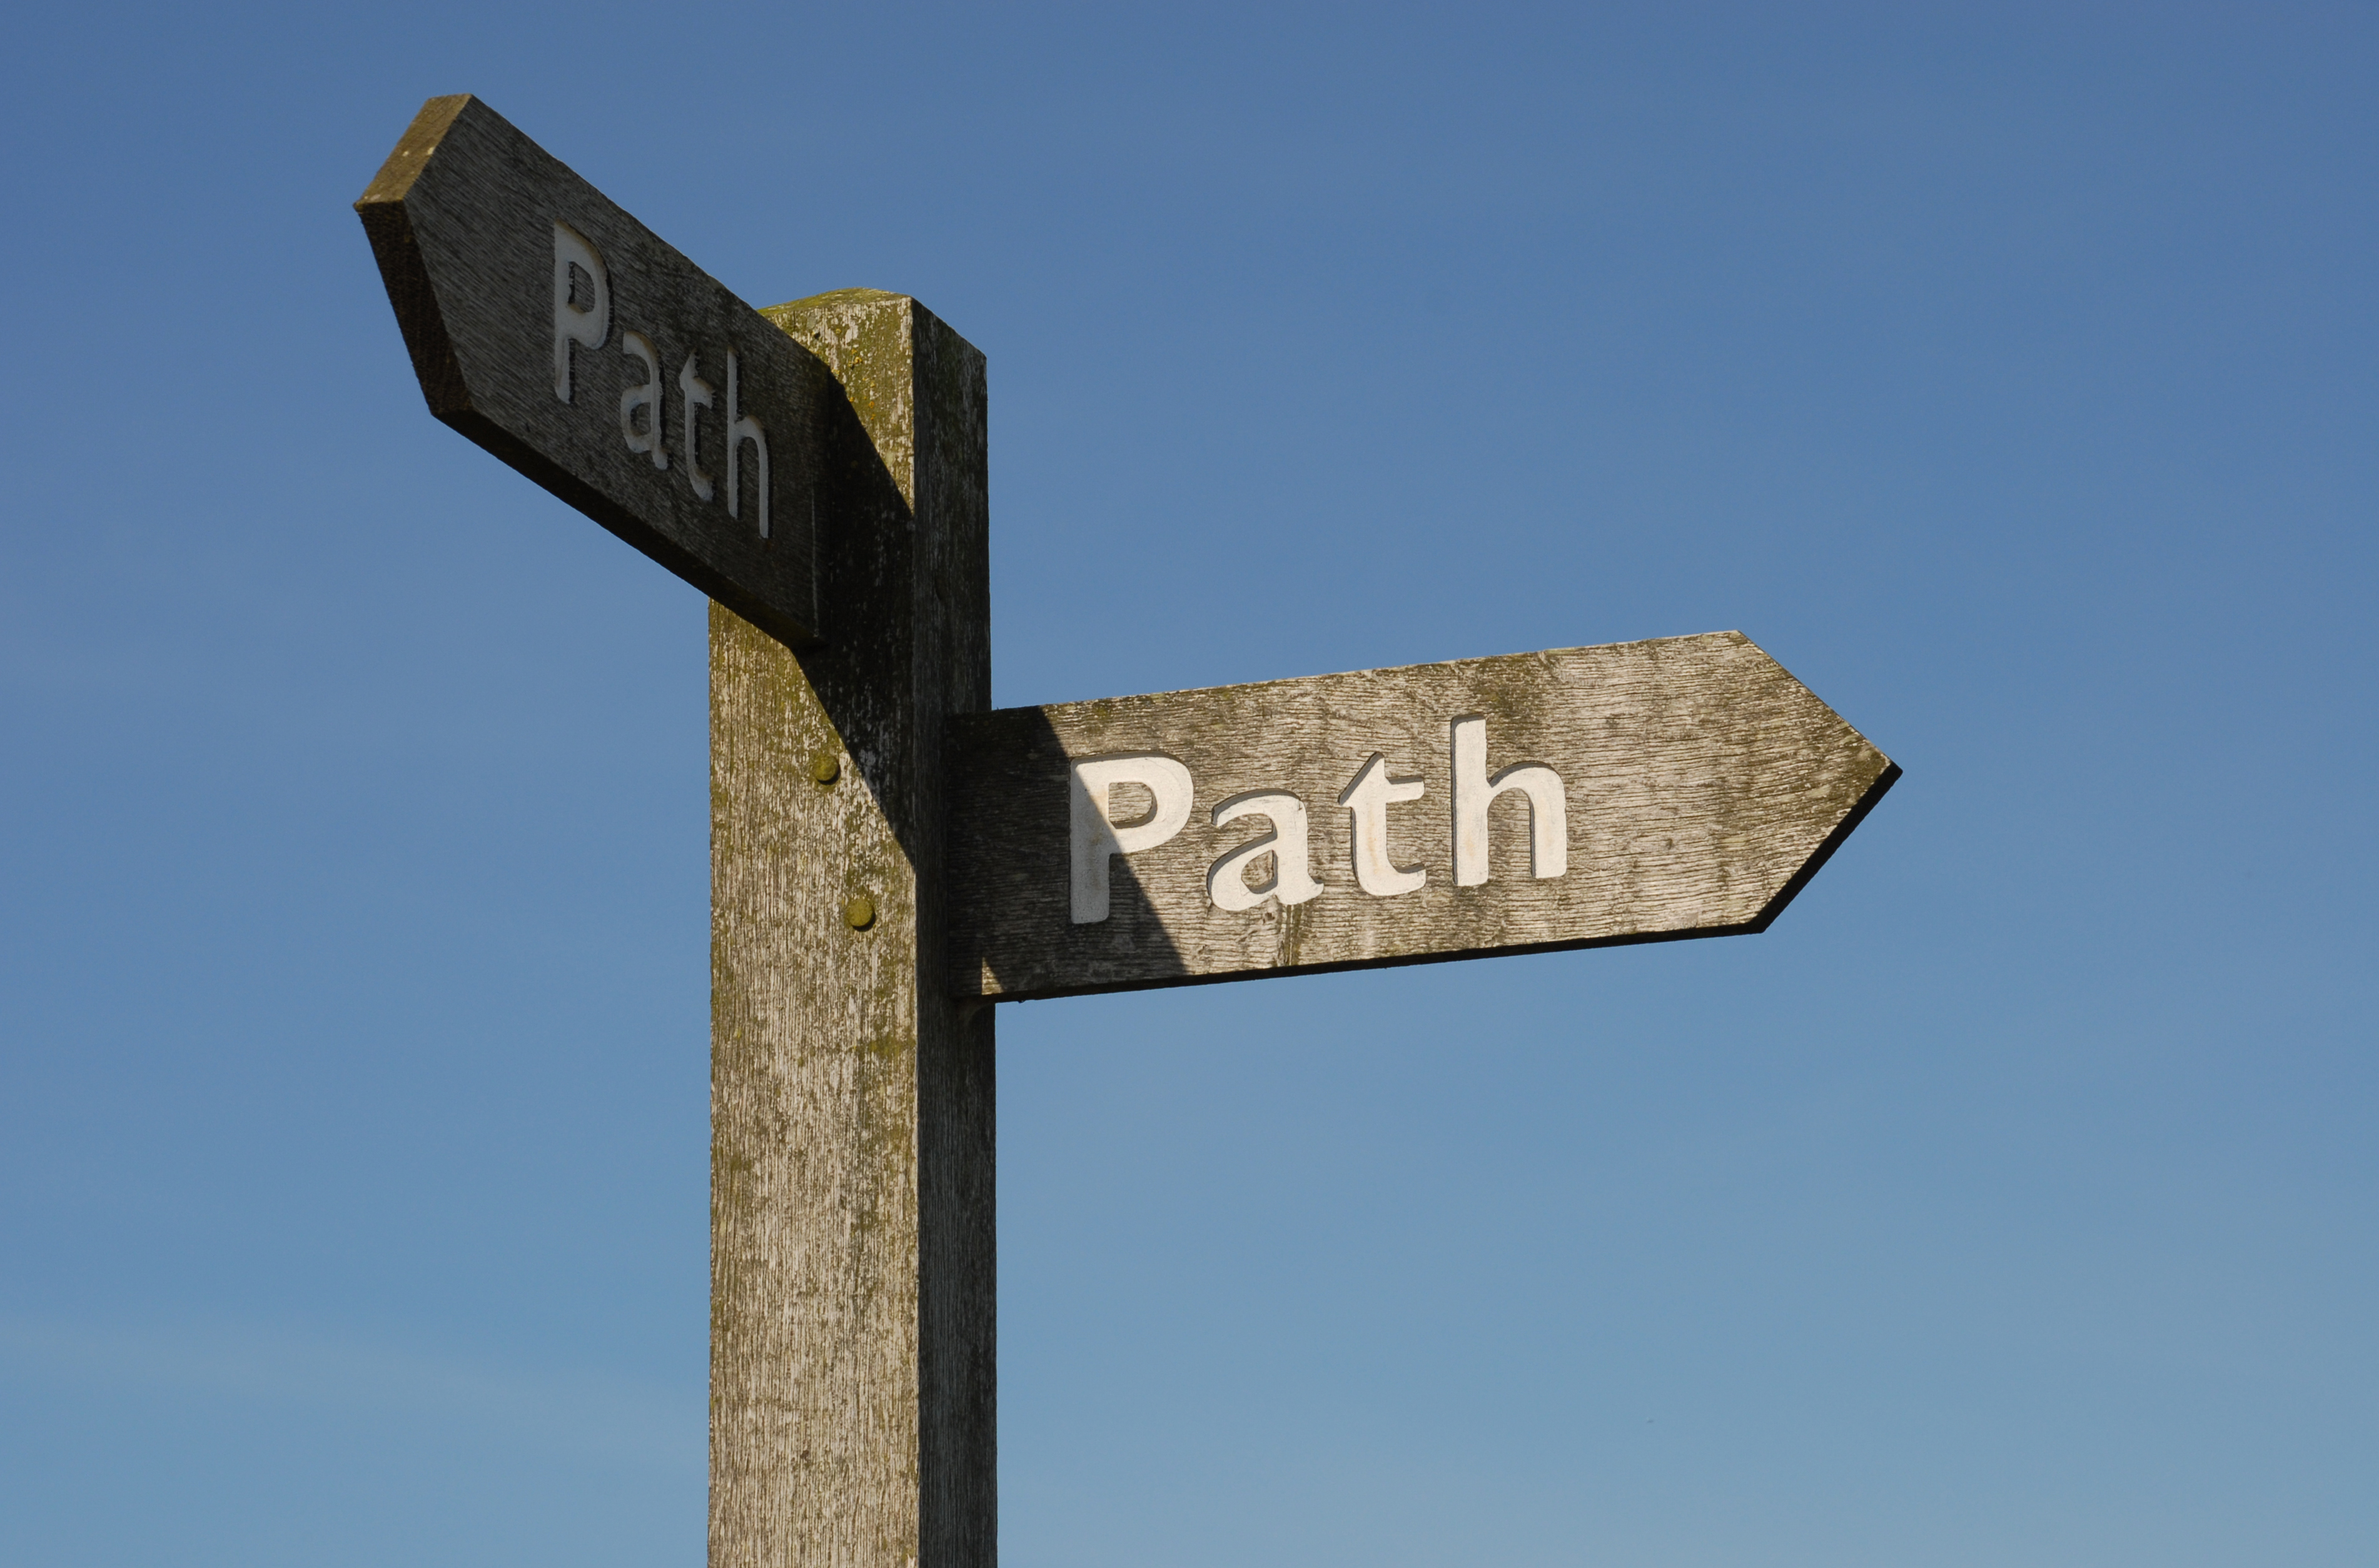 signpost that reads "path"